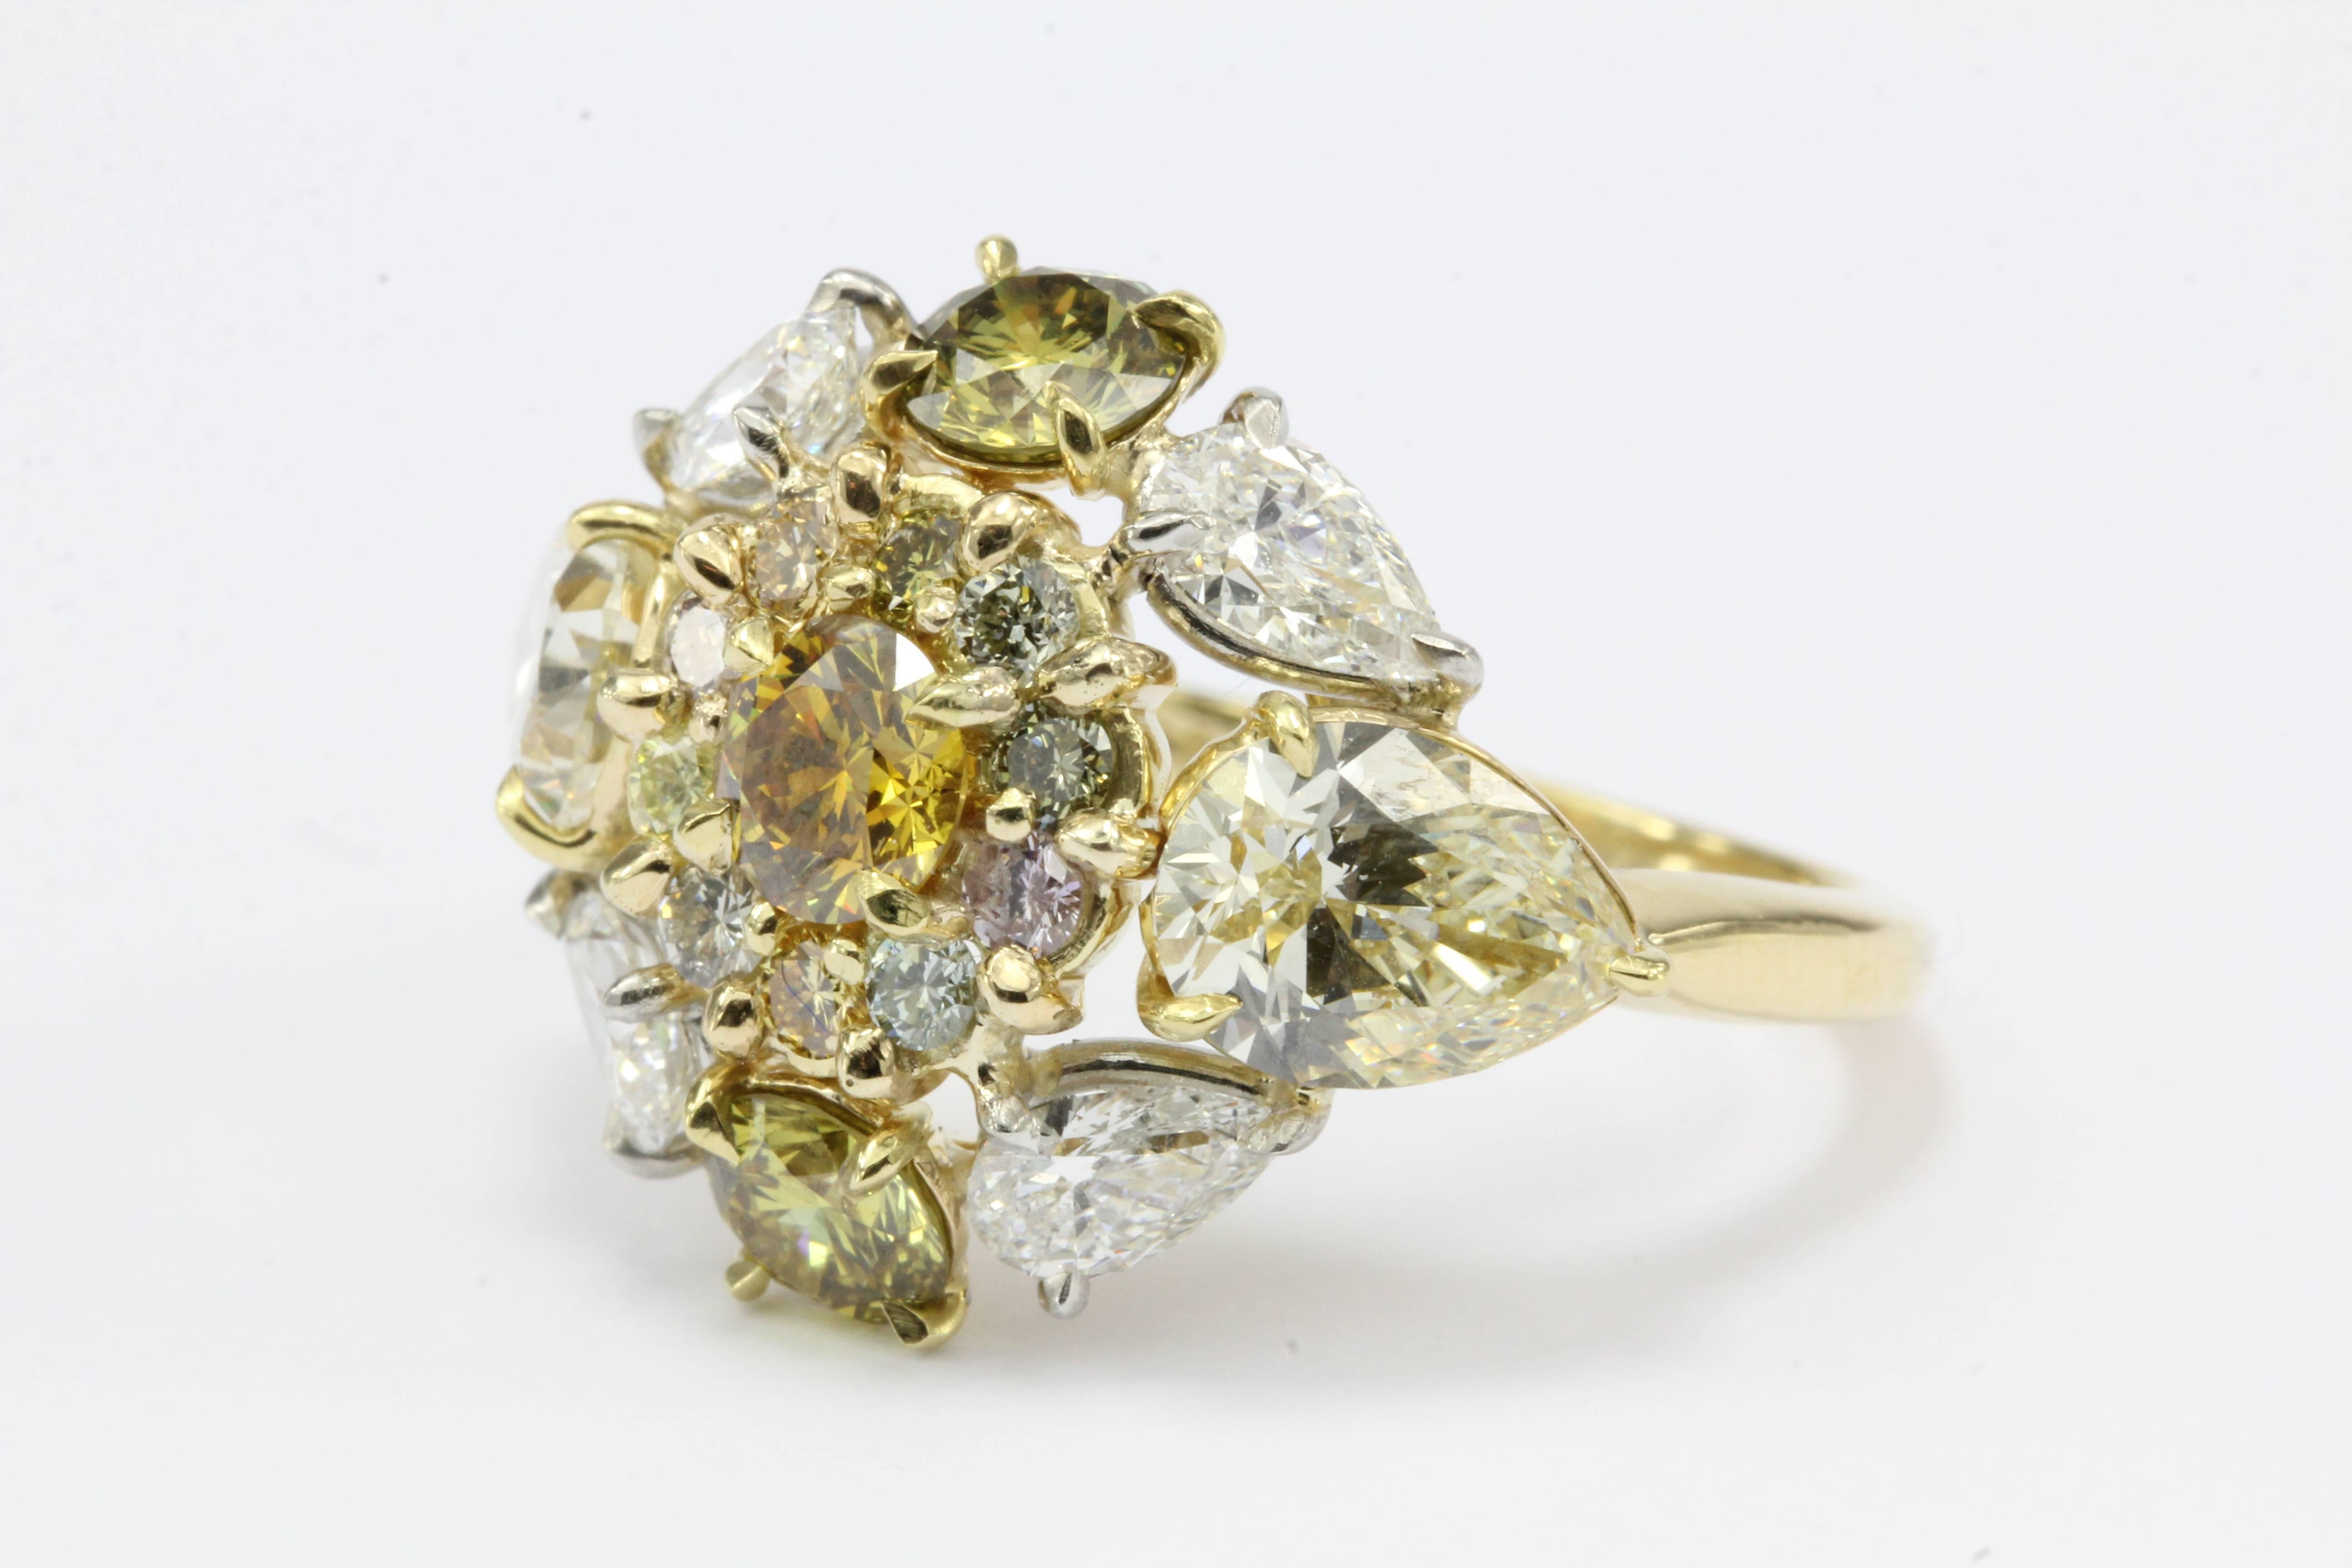 Fancy Yellow & White Diamond 18K Gold & Platinum 5CTW Ring

Like a field of freshly blooming dandelions glistening with dew in the morning sun this ring has the power to take you to your happy place. There are approximately 5 carats of